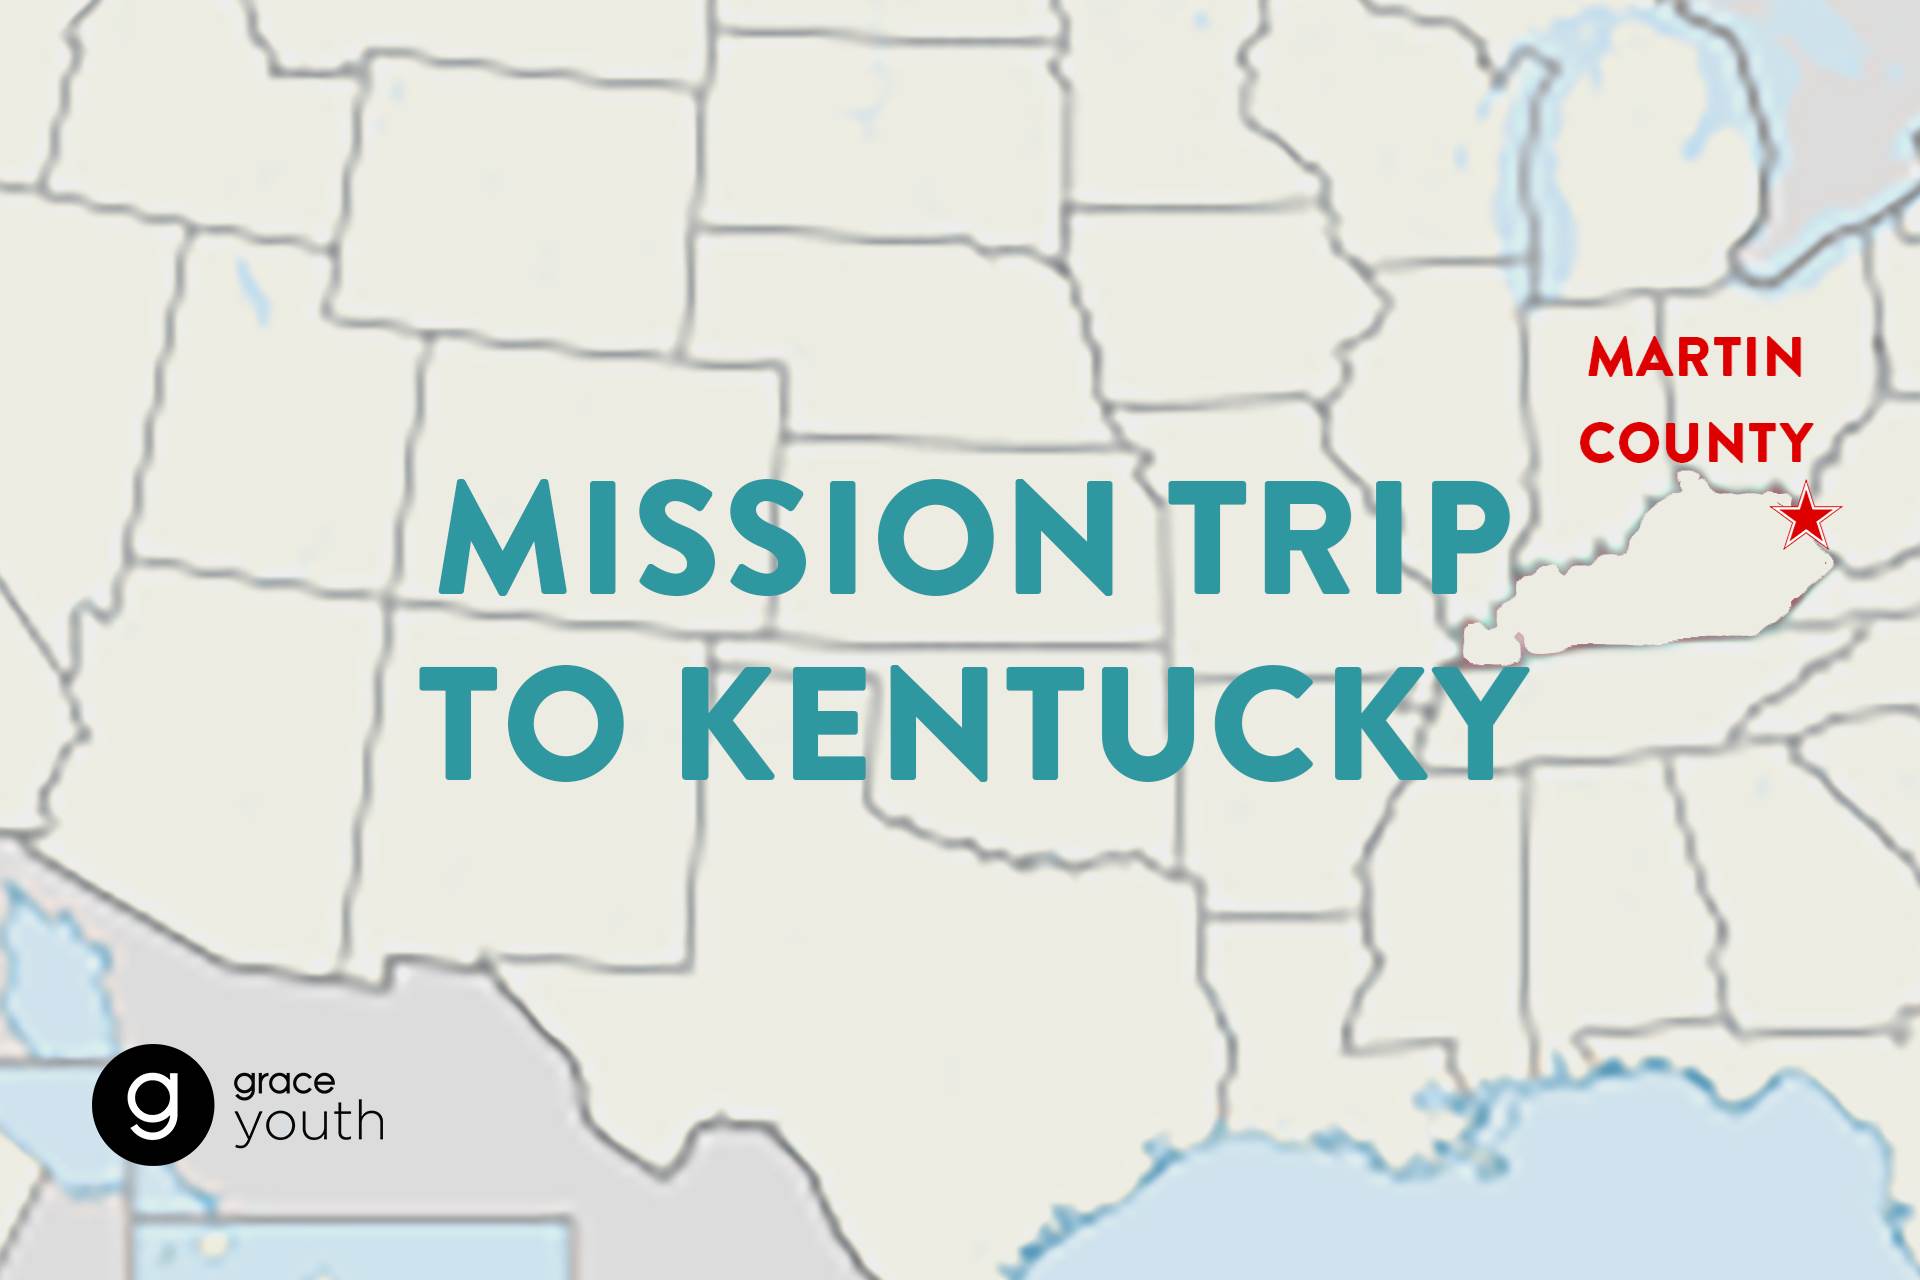 Link to Youth Mission Trip to Kentucky detail page